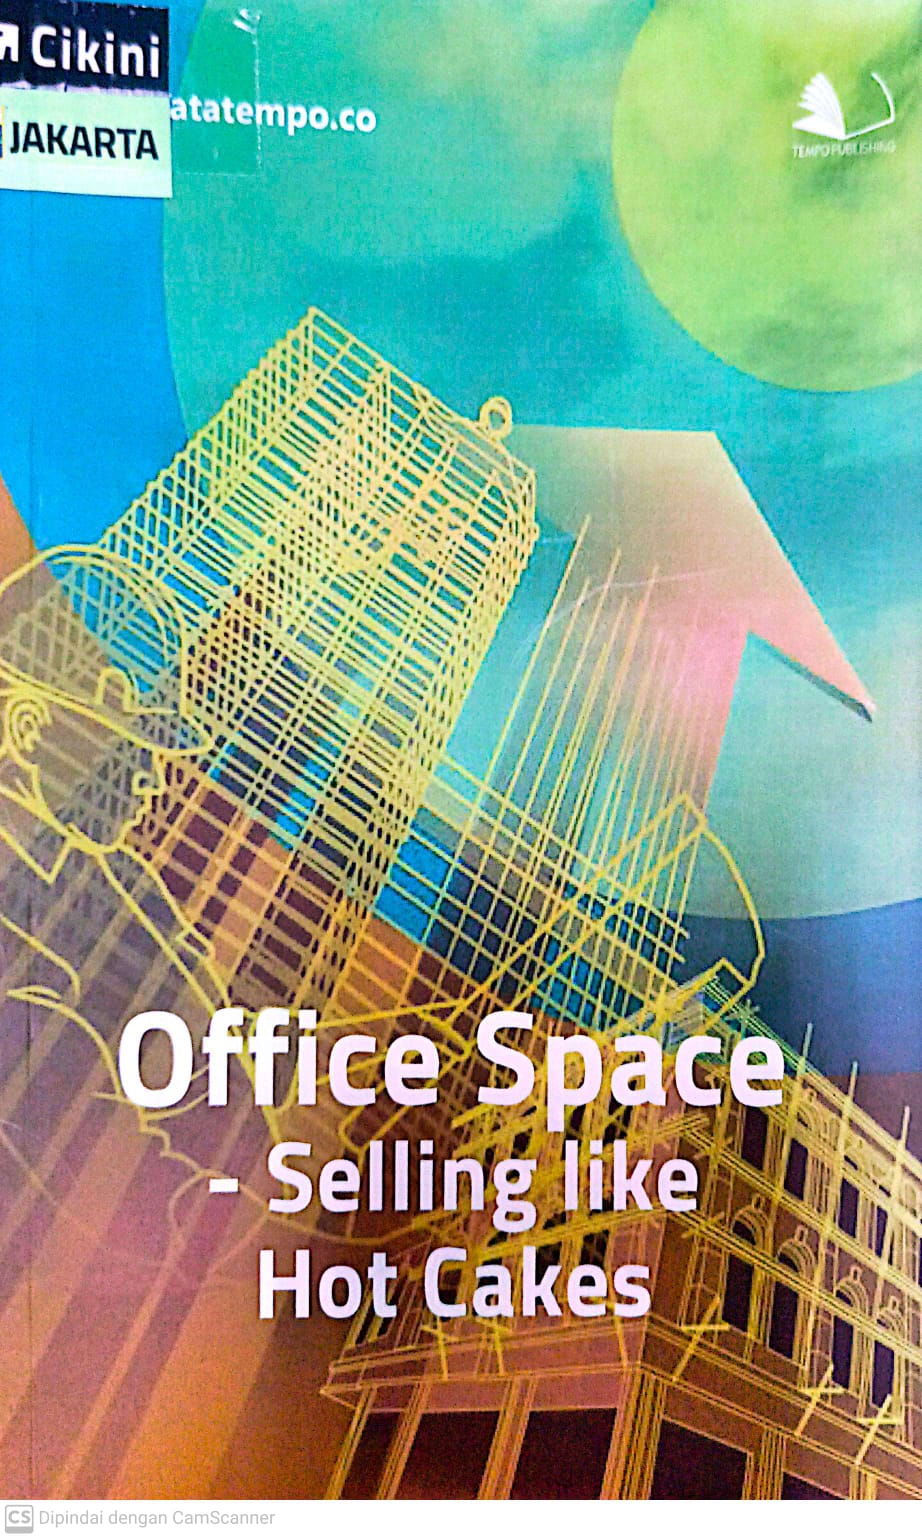 Office space - selling like hot cakes